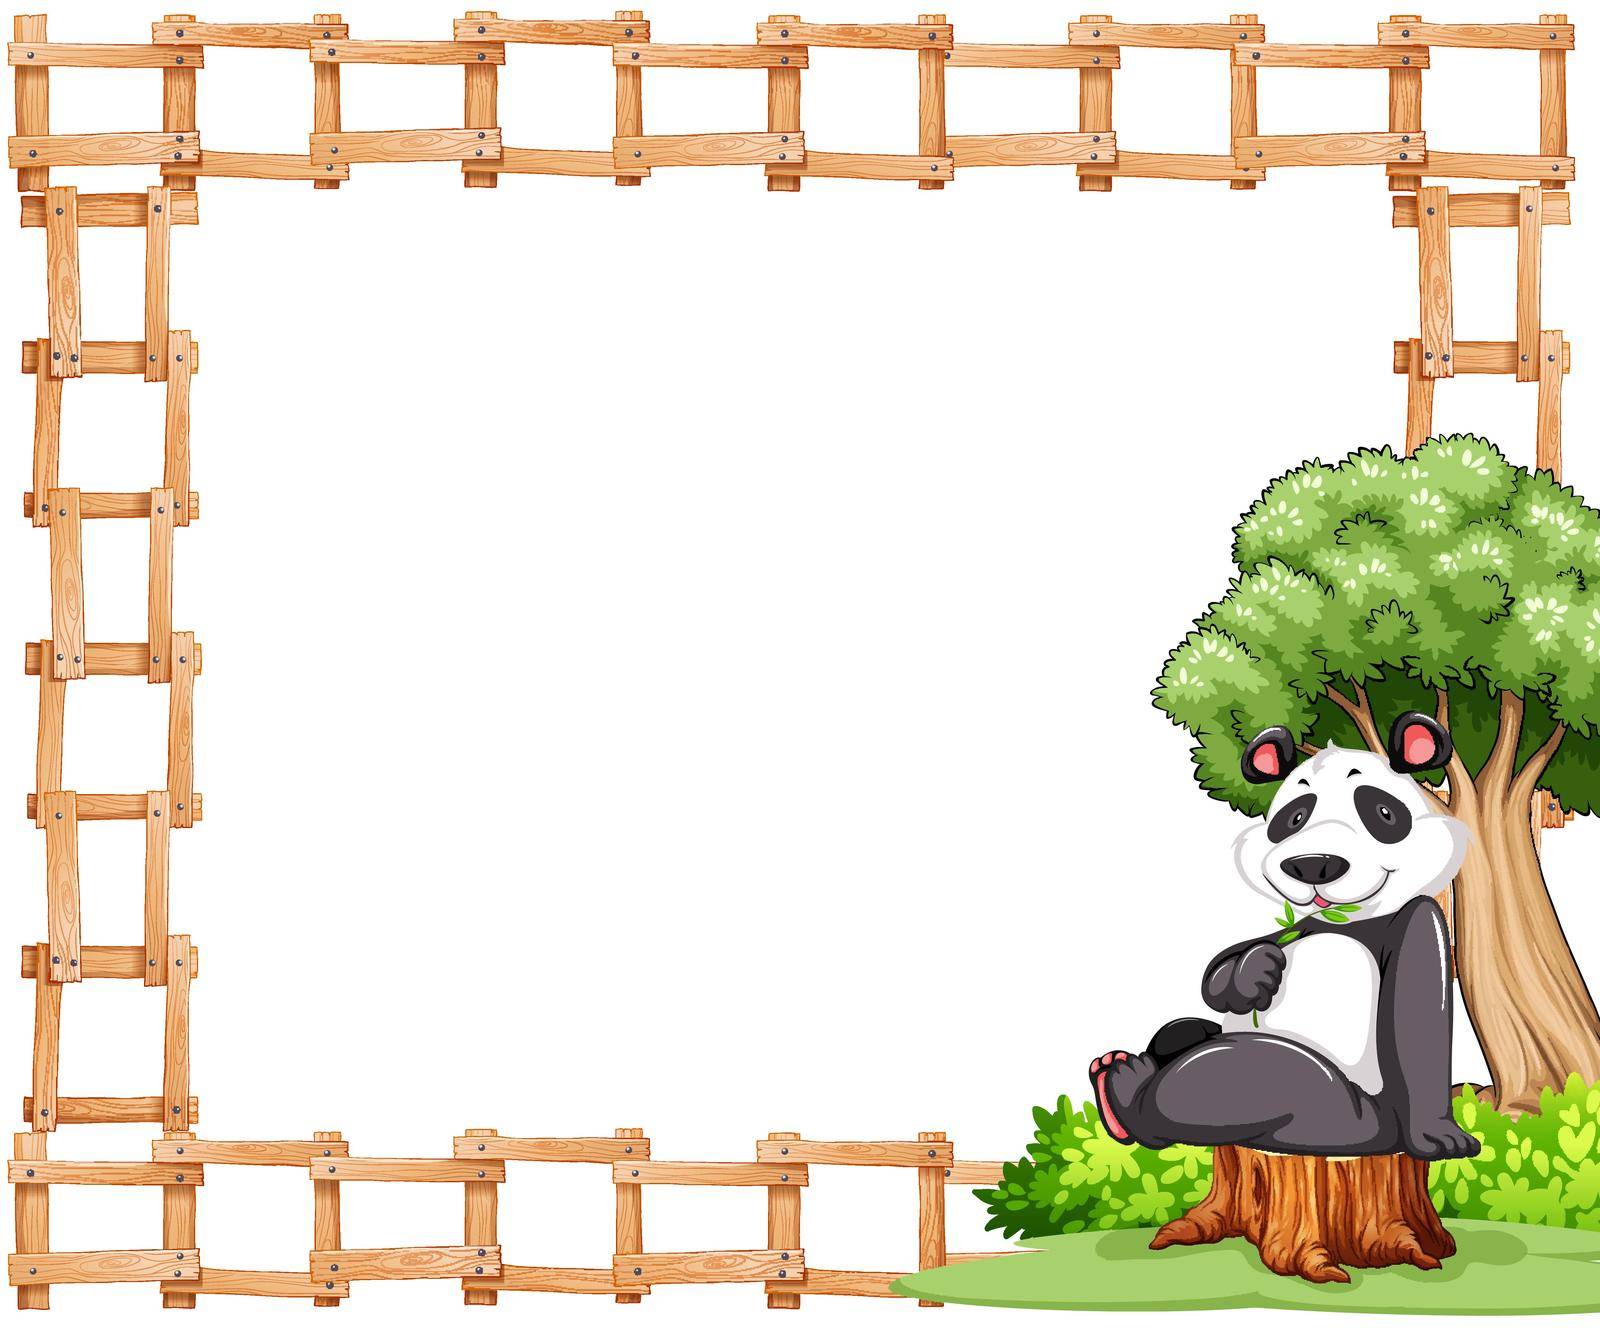 Fence design frame and panda on a white paper